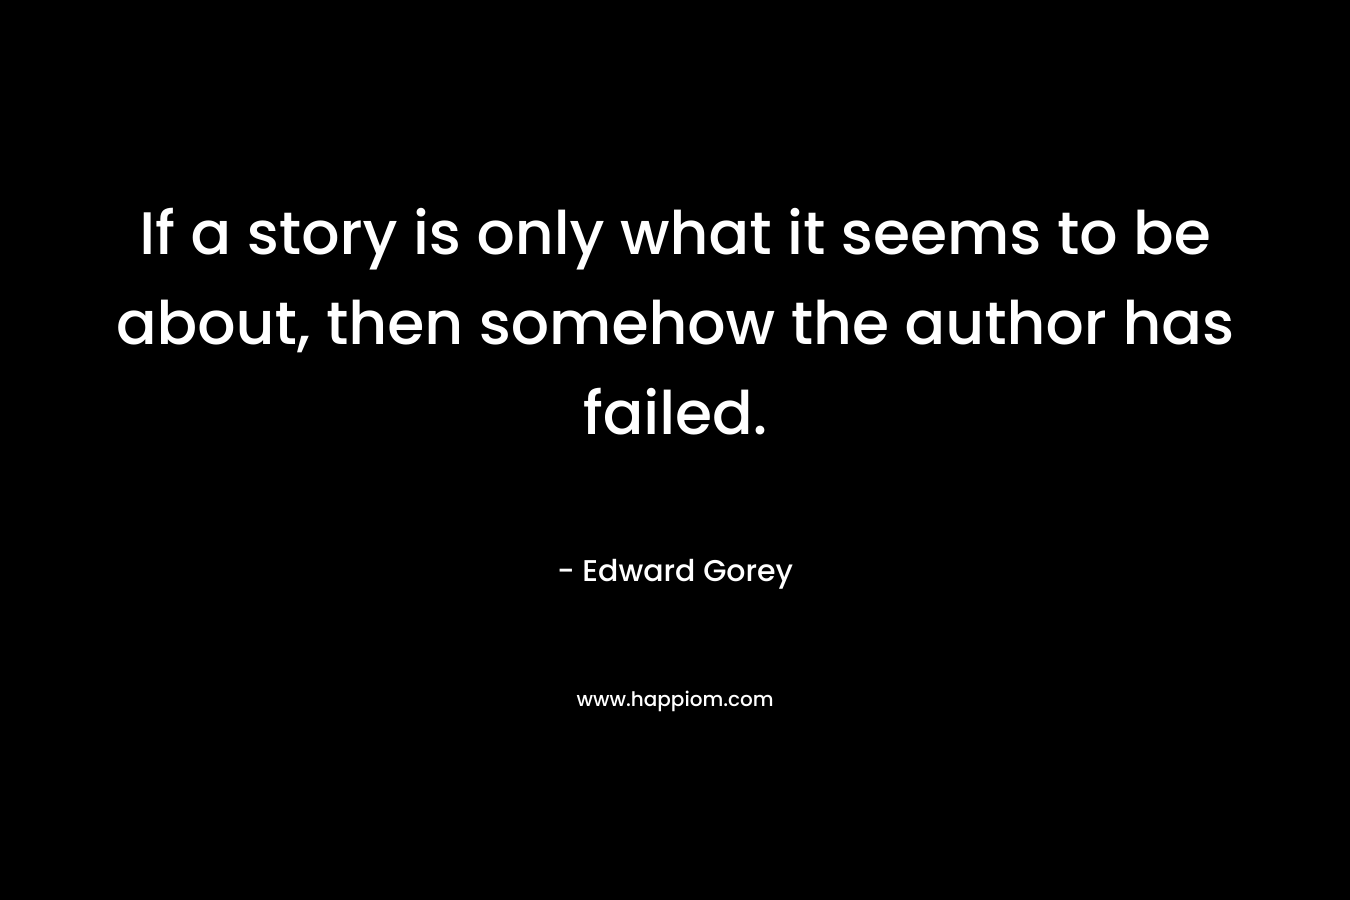 If a story is only what it seems to be about, then somehow the author has failed. – Edward Gorey